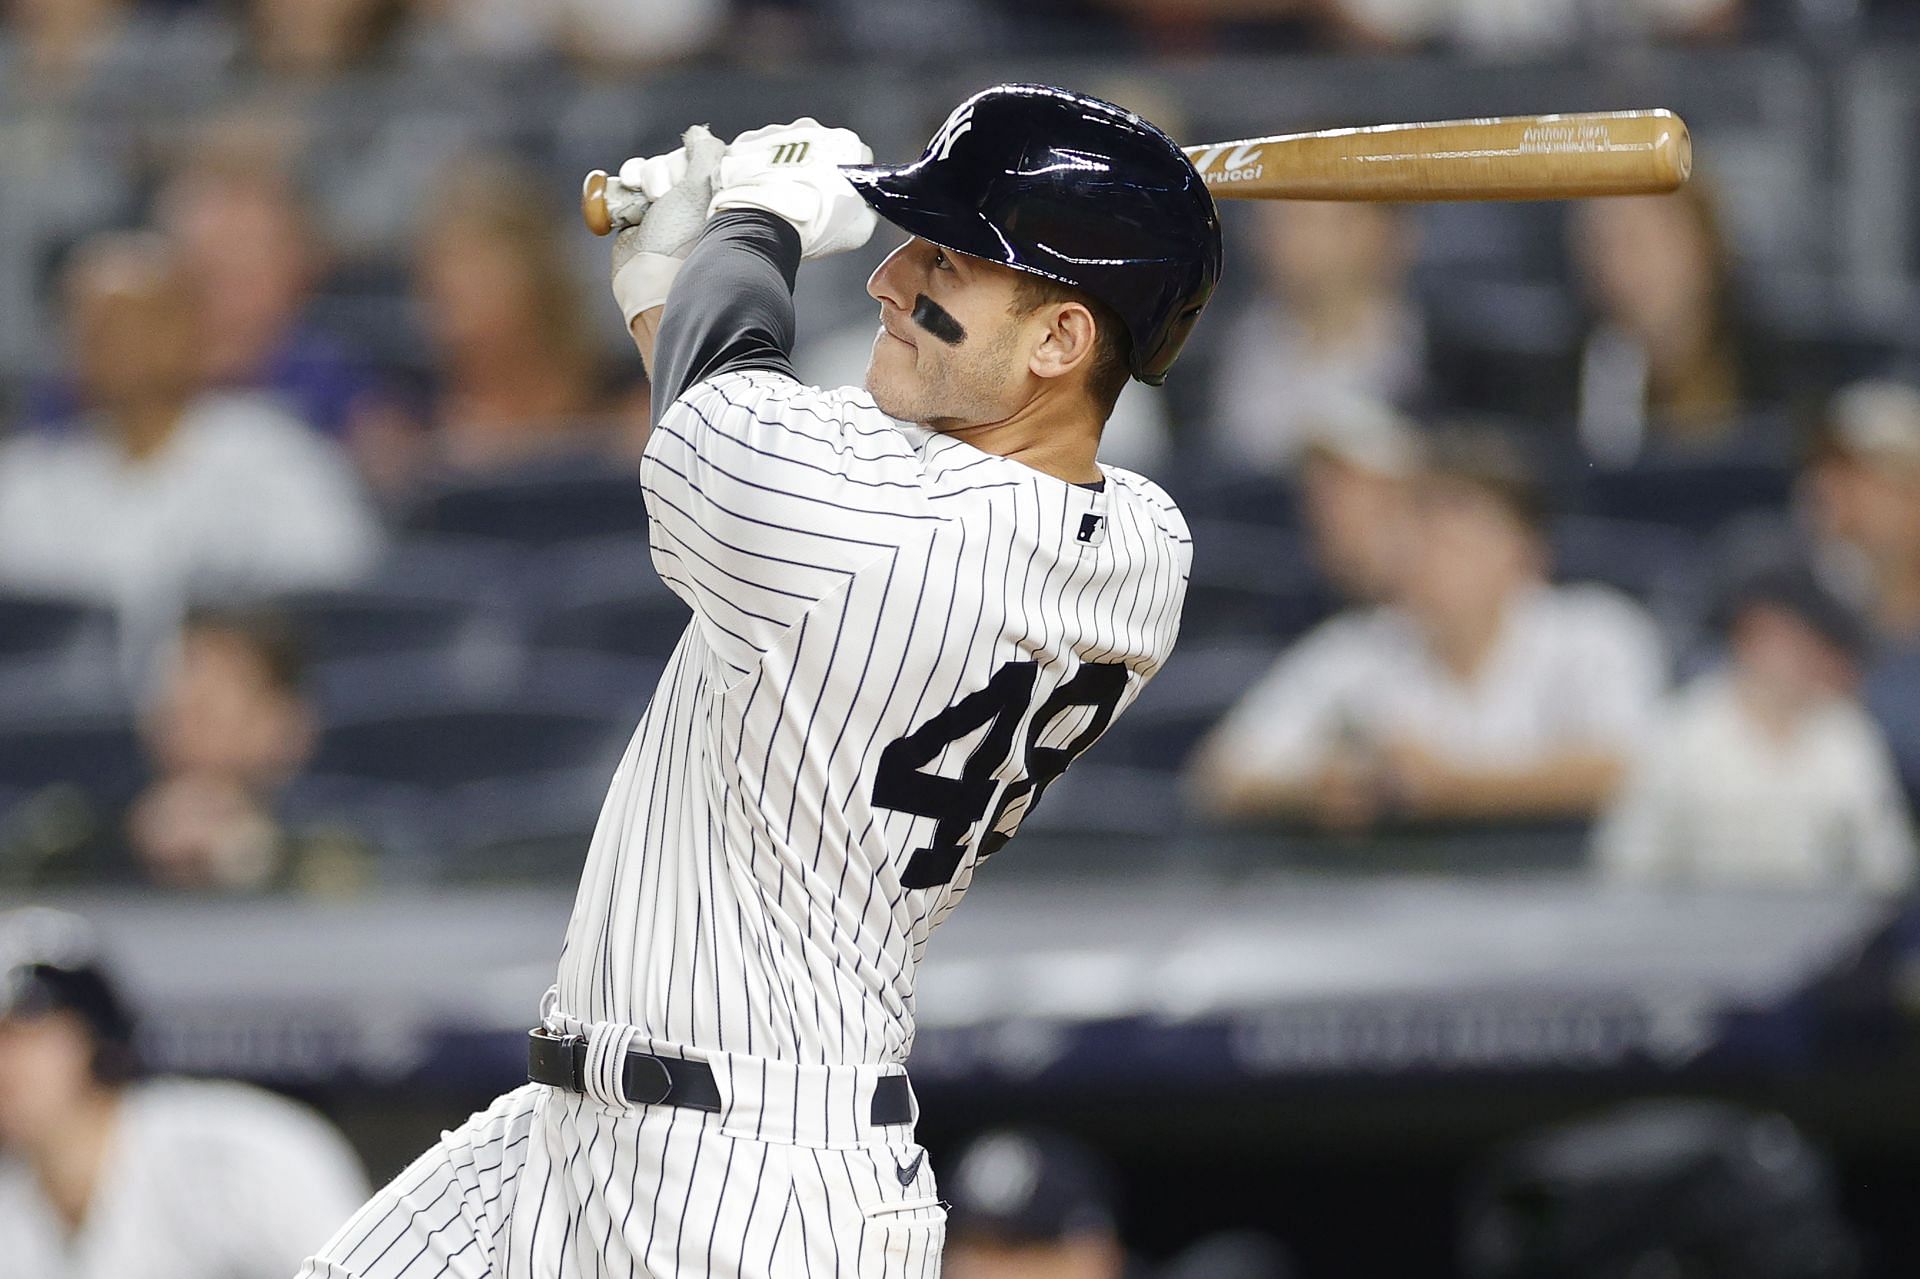 Anthony Rizzo crushes home run in first game with Yankees